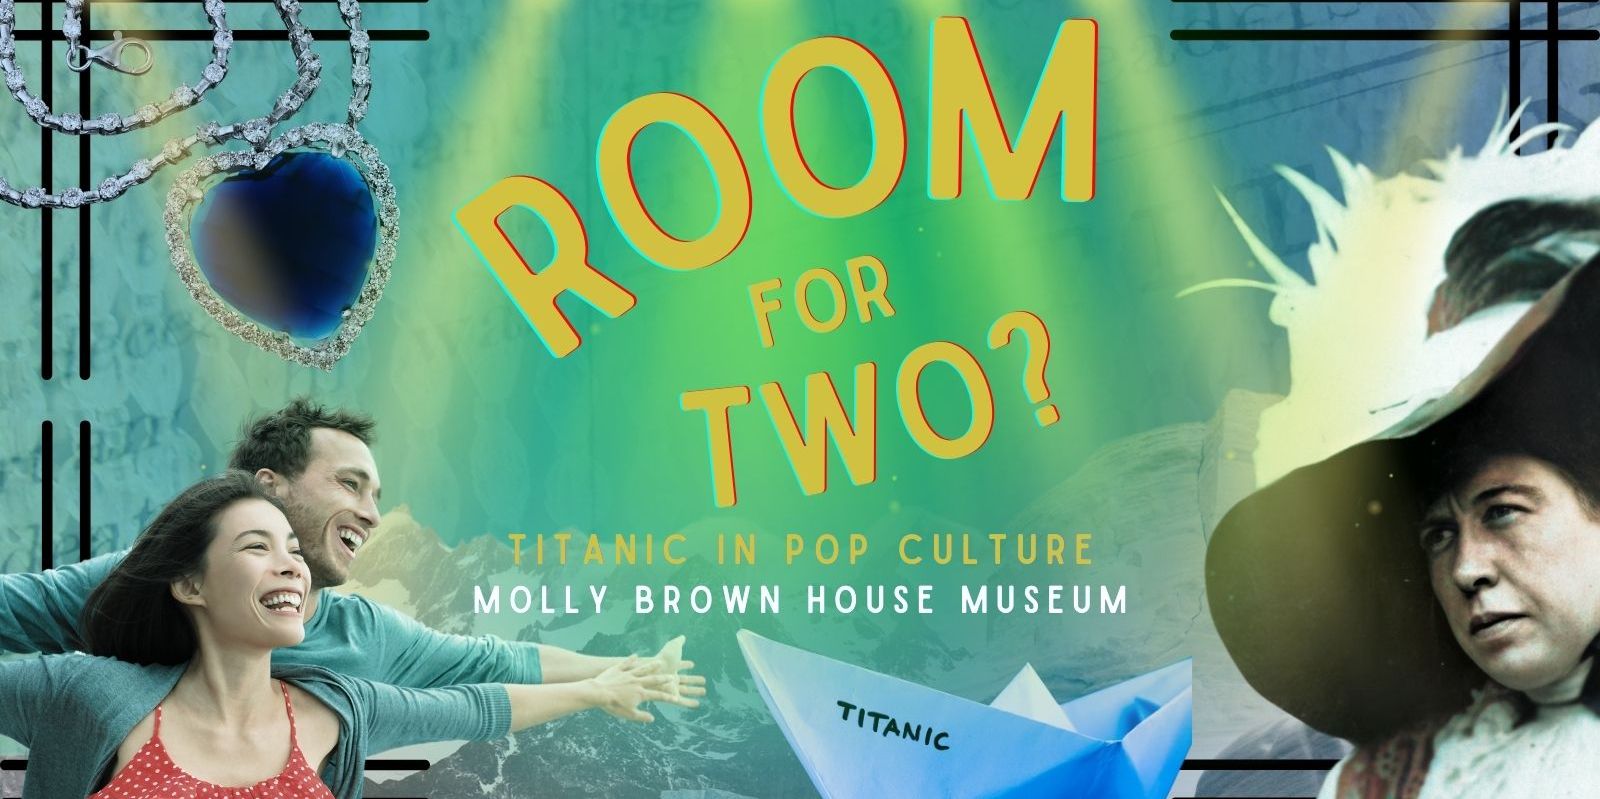 Room For Two: Titanic in Pop Culture promotional image